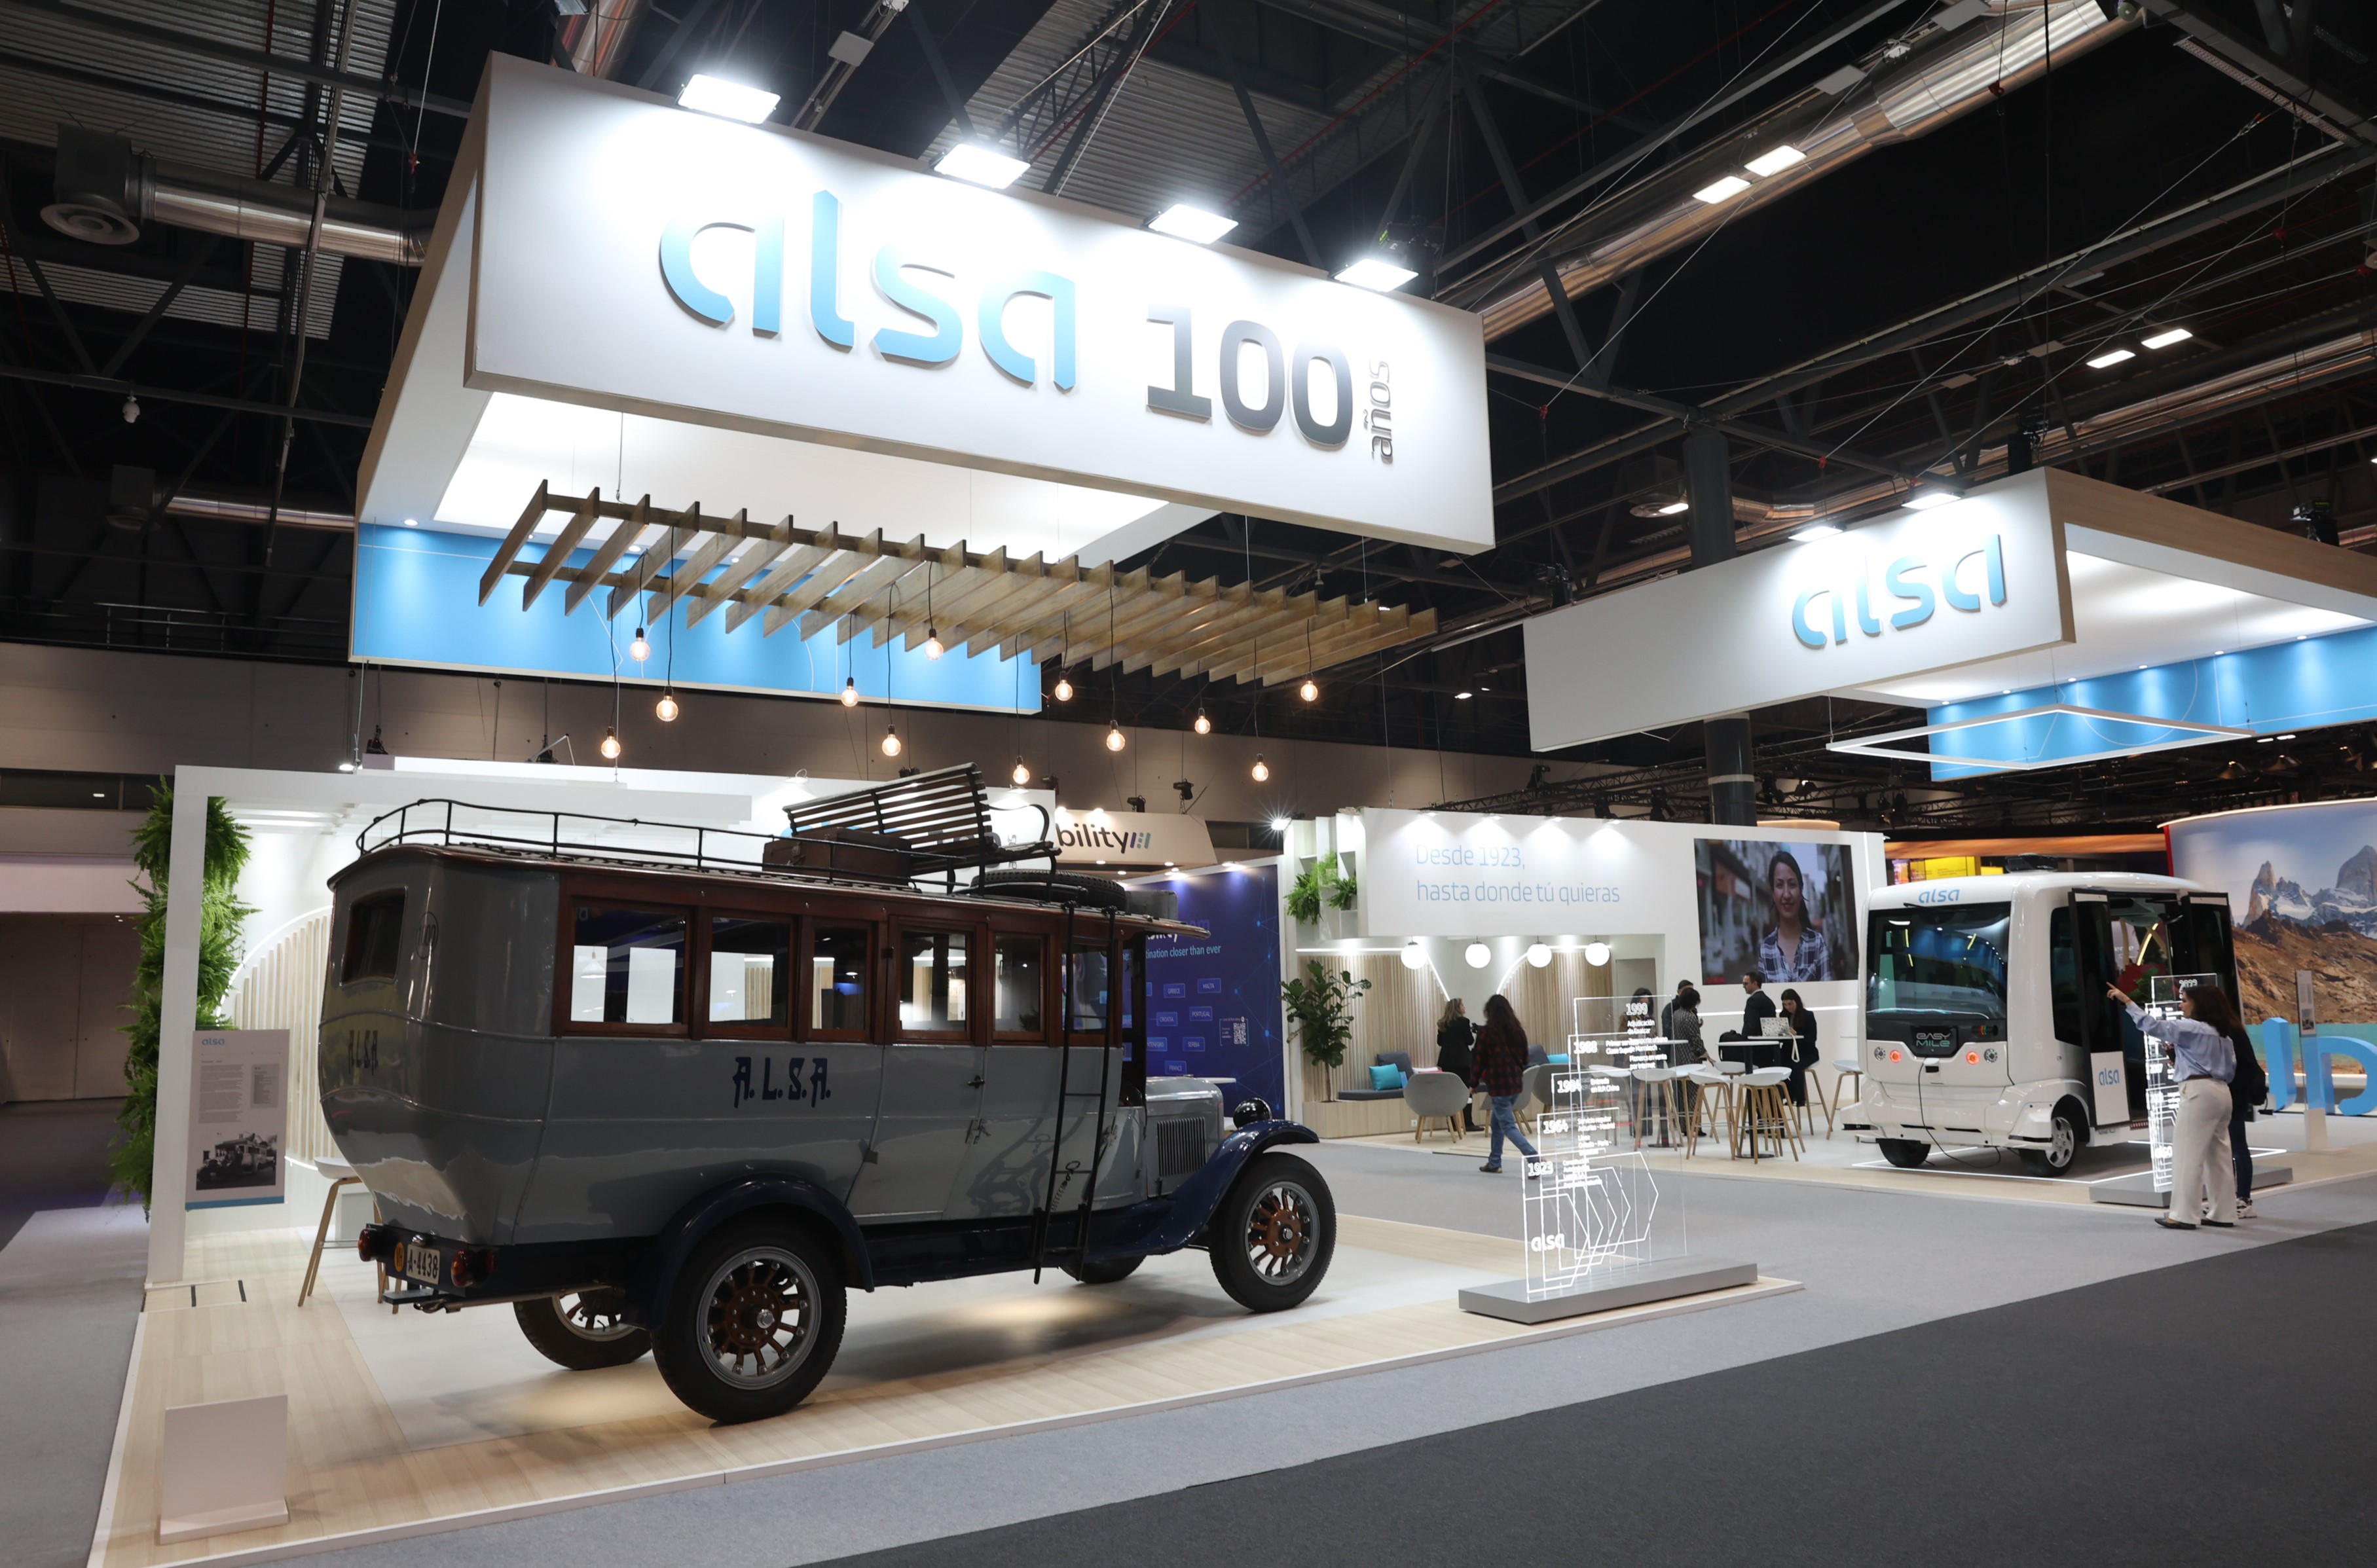 Alsa begins the commemoration of its centenary at FITUR